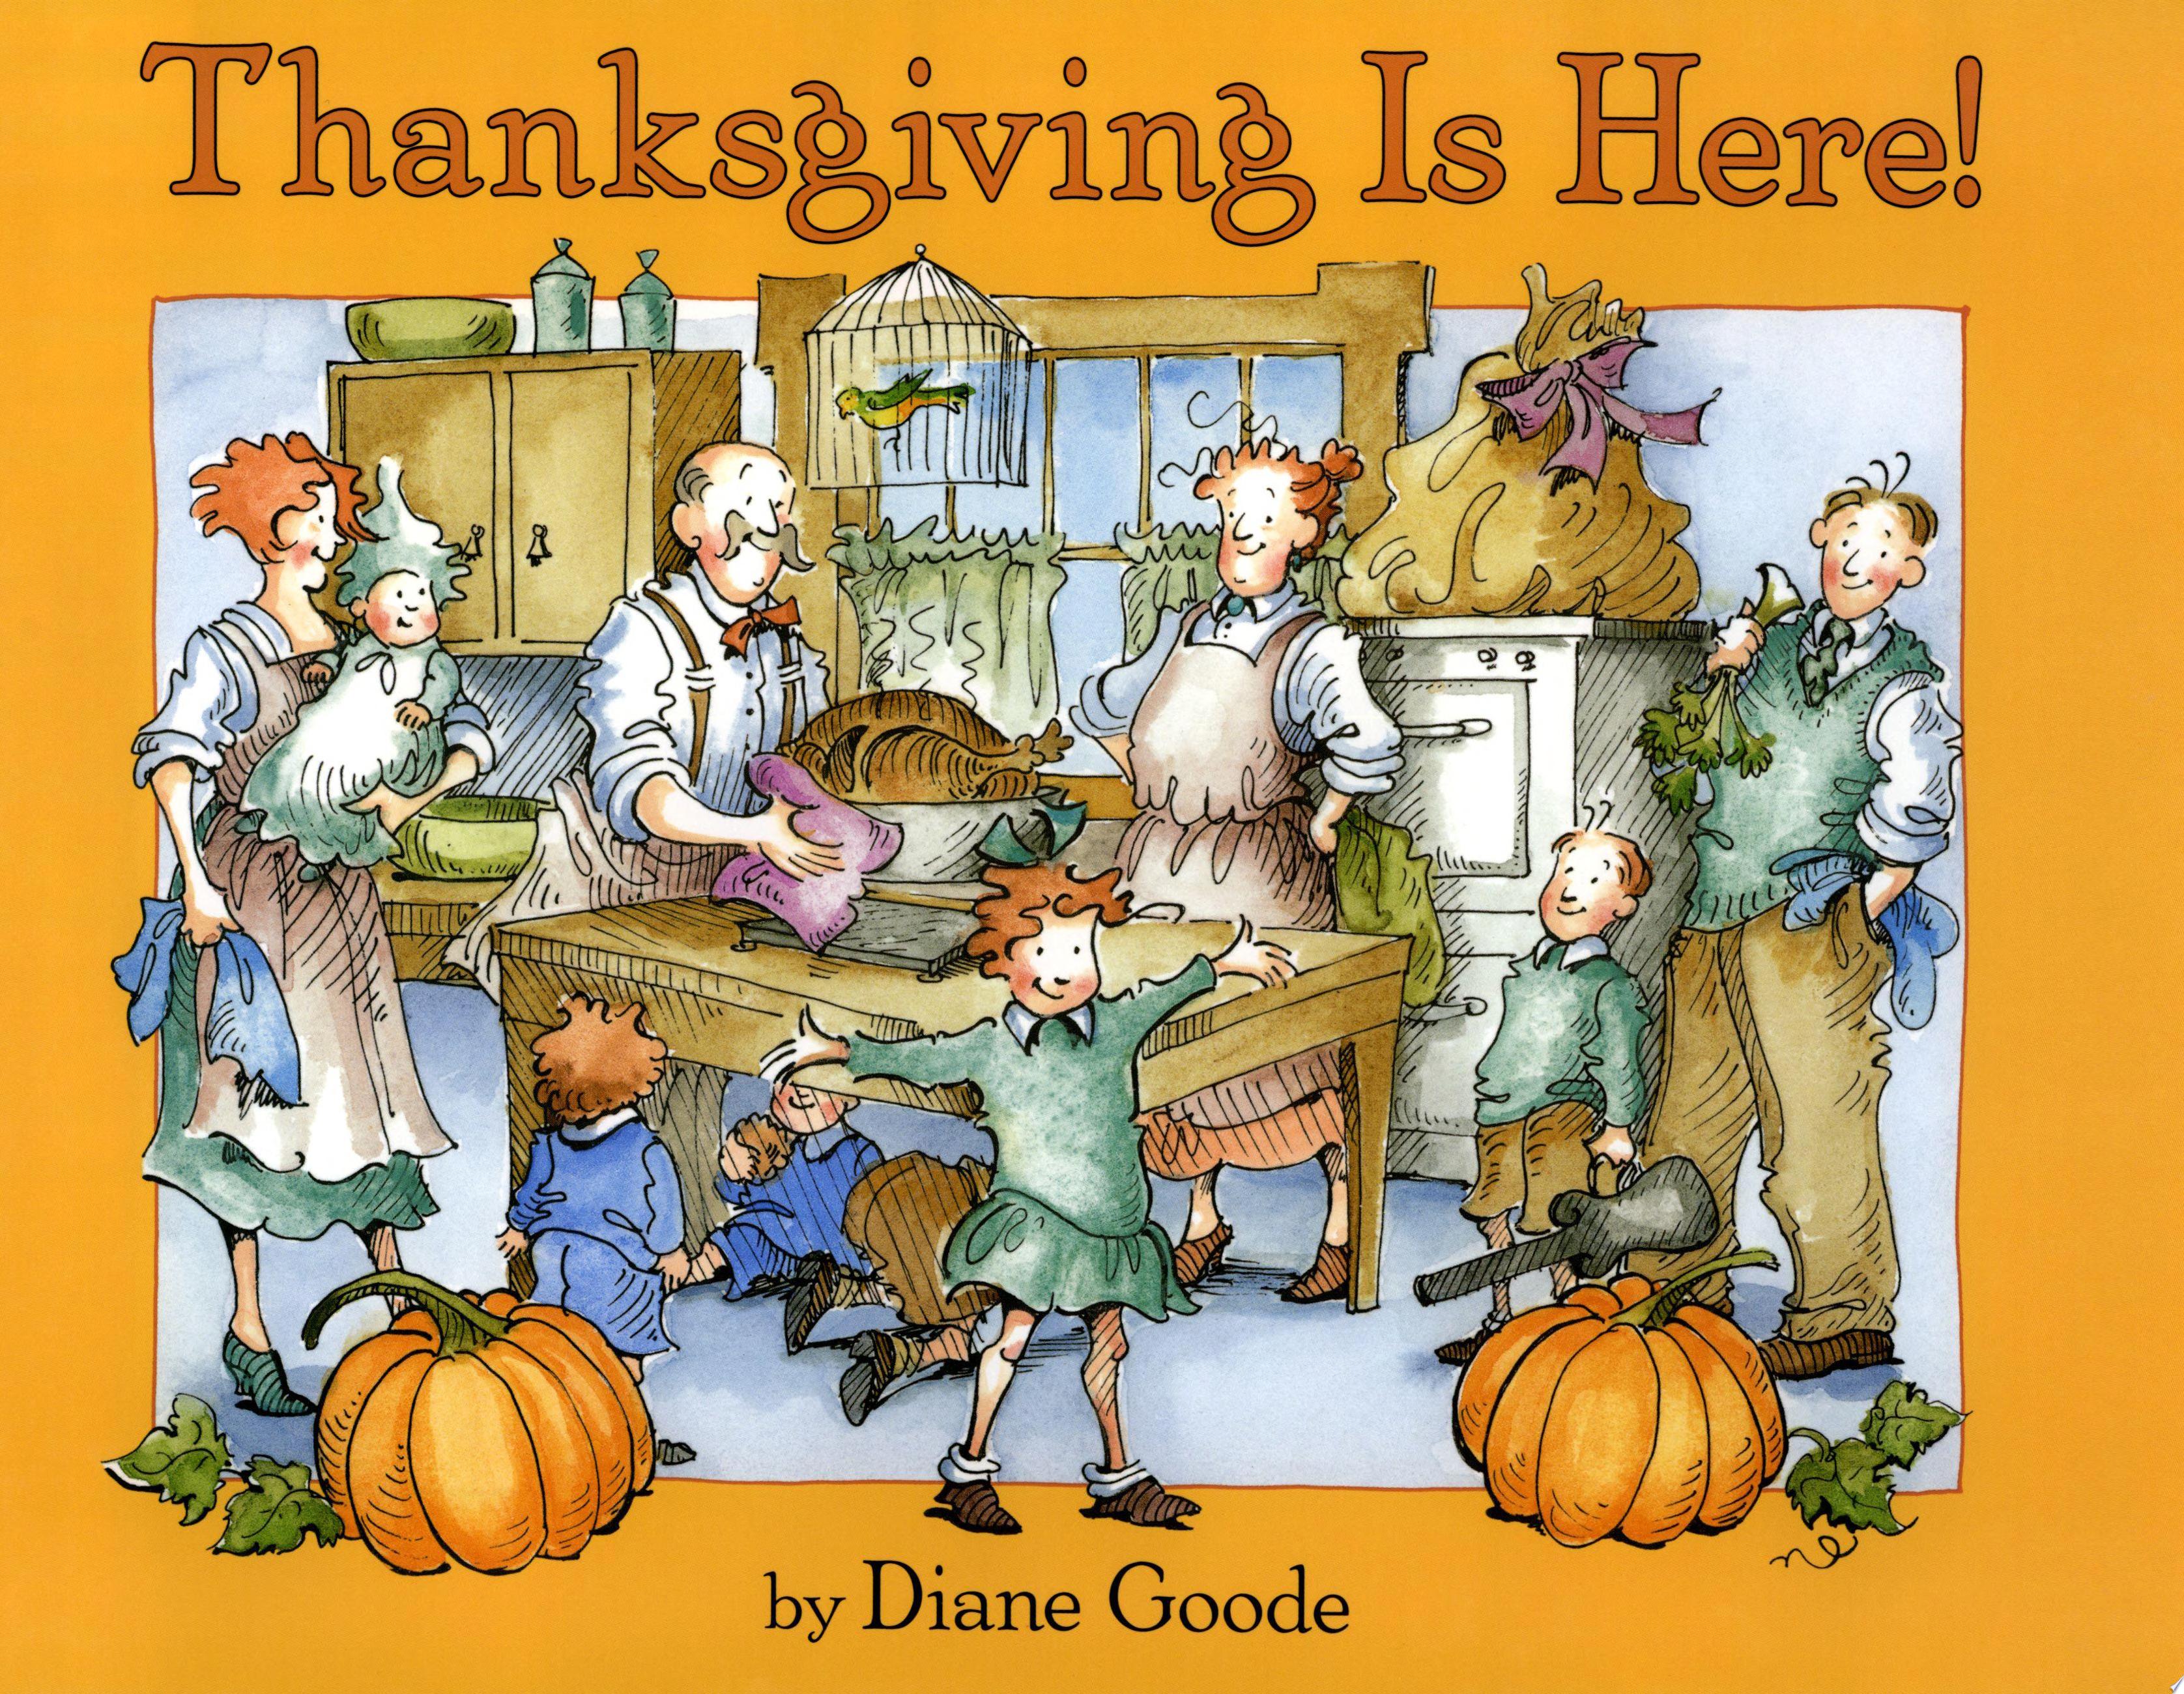 Image for "Thanksgiving Is Here!"